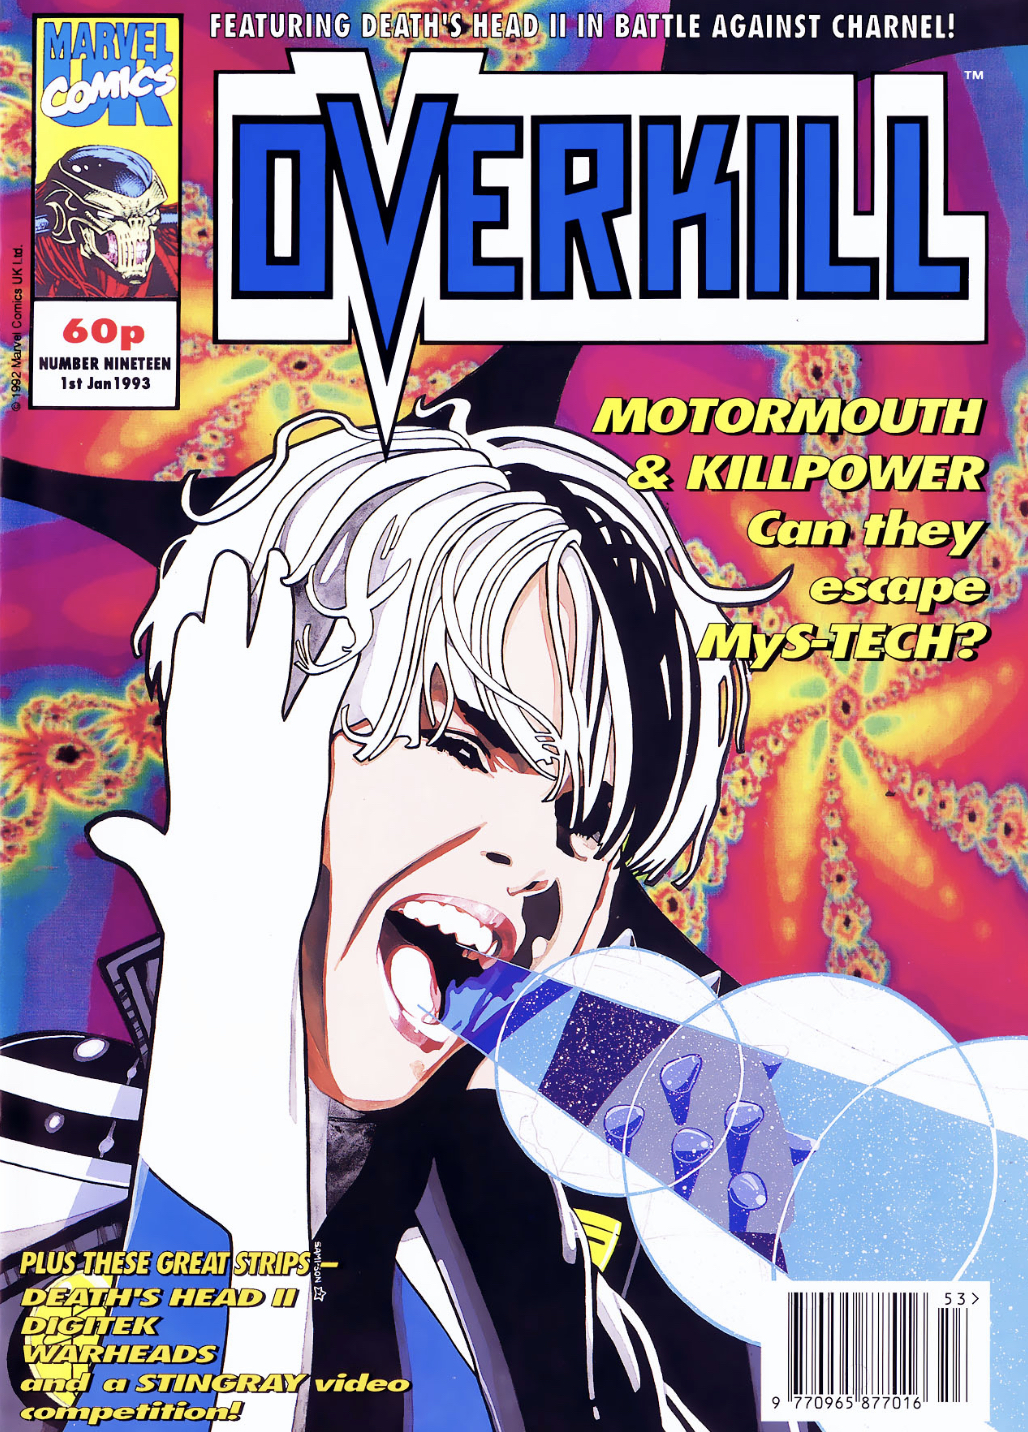 Overkill #19 cover featuring Motormouth by Steve Sampson (Marvel UK)